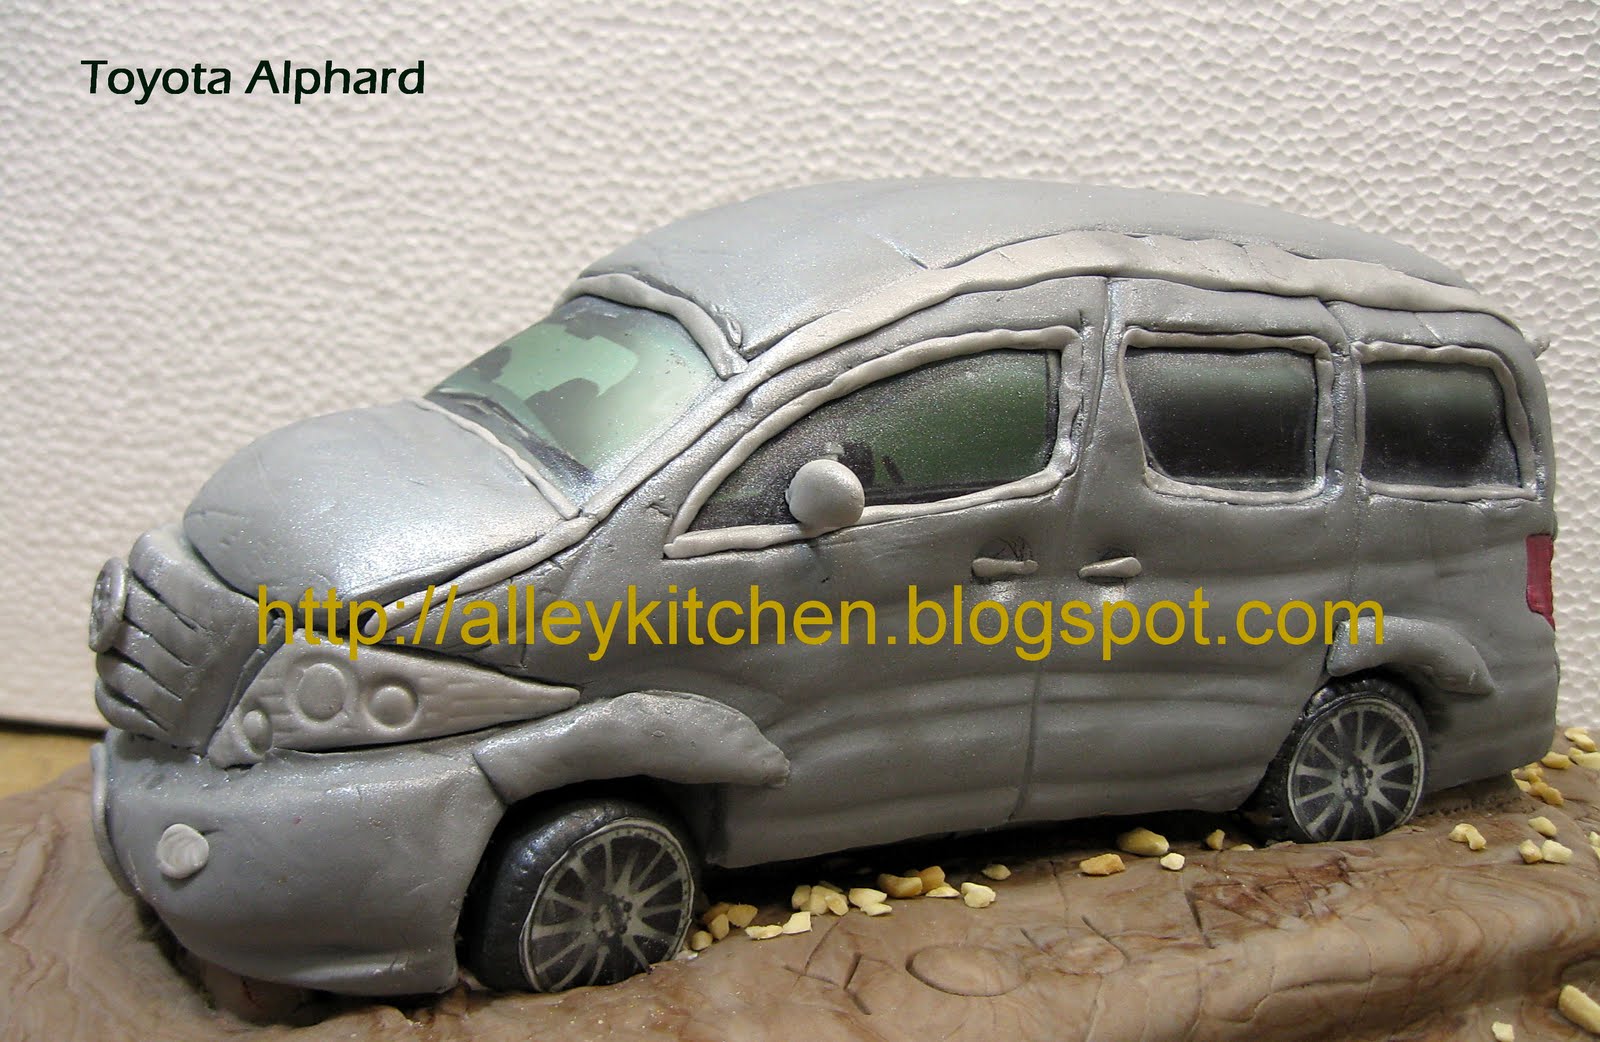 Aroma from Alley Kitchen: Toyota Alphard